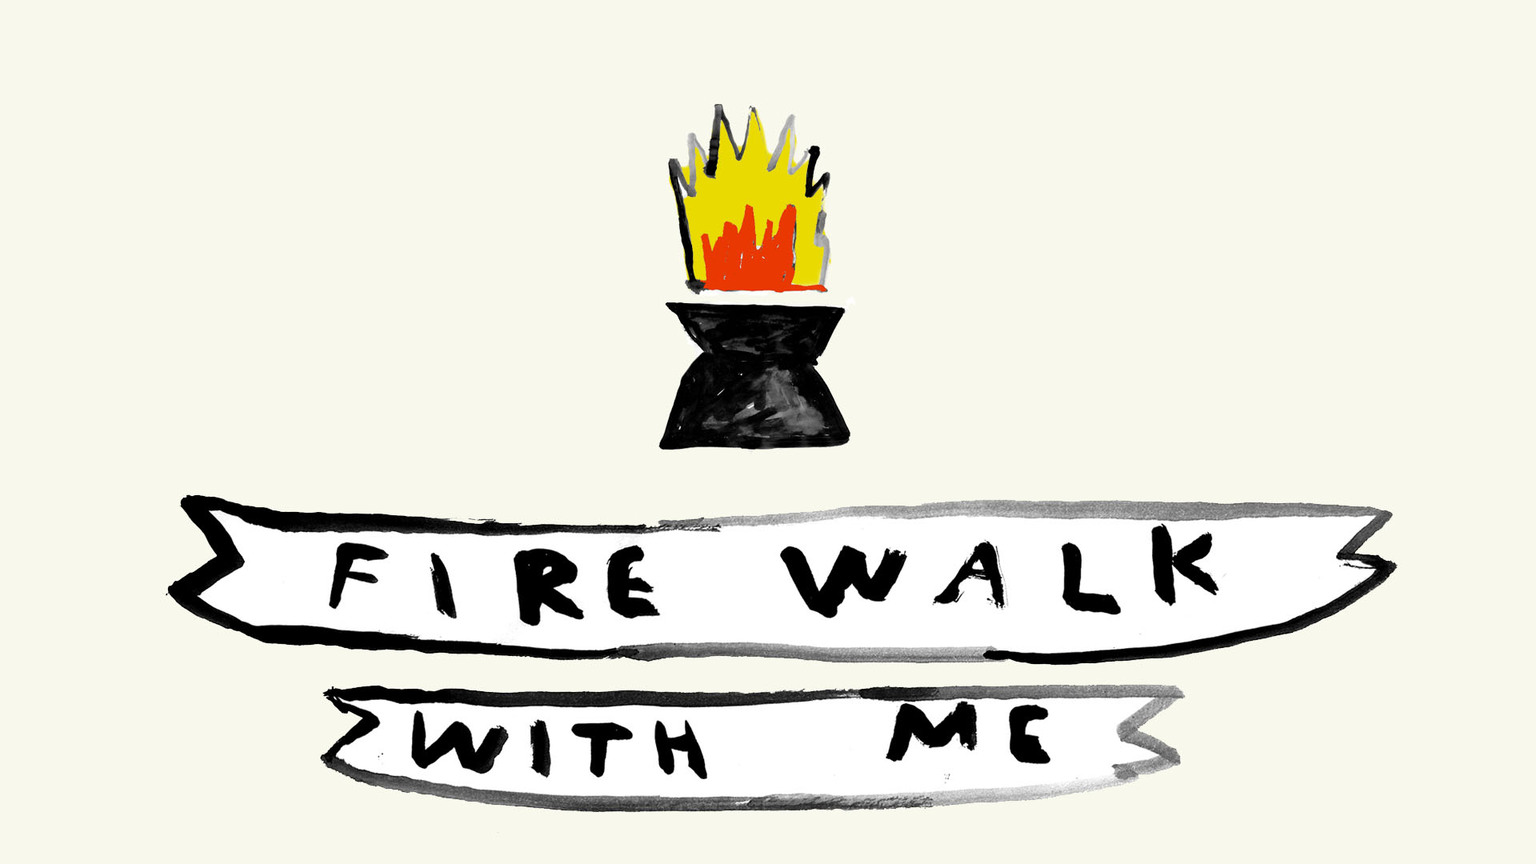 Fire Walk With Me